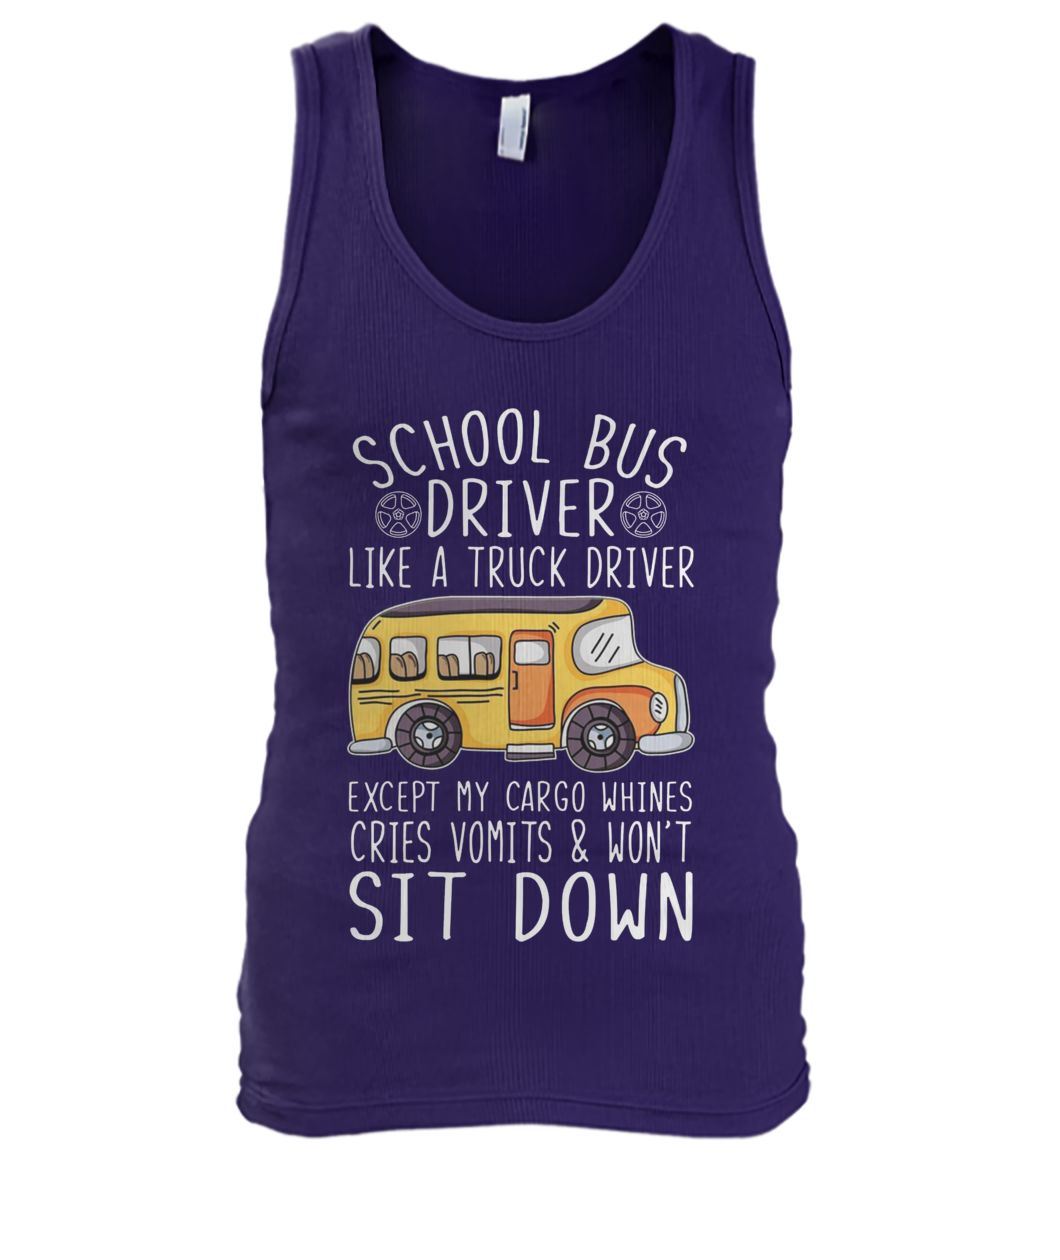 School bus driver I'm like a truck driver except my cargo whines men's tank top